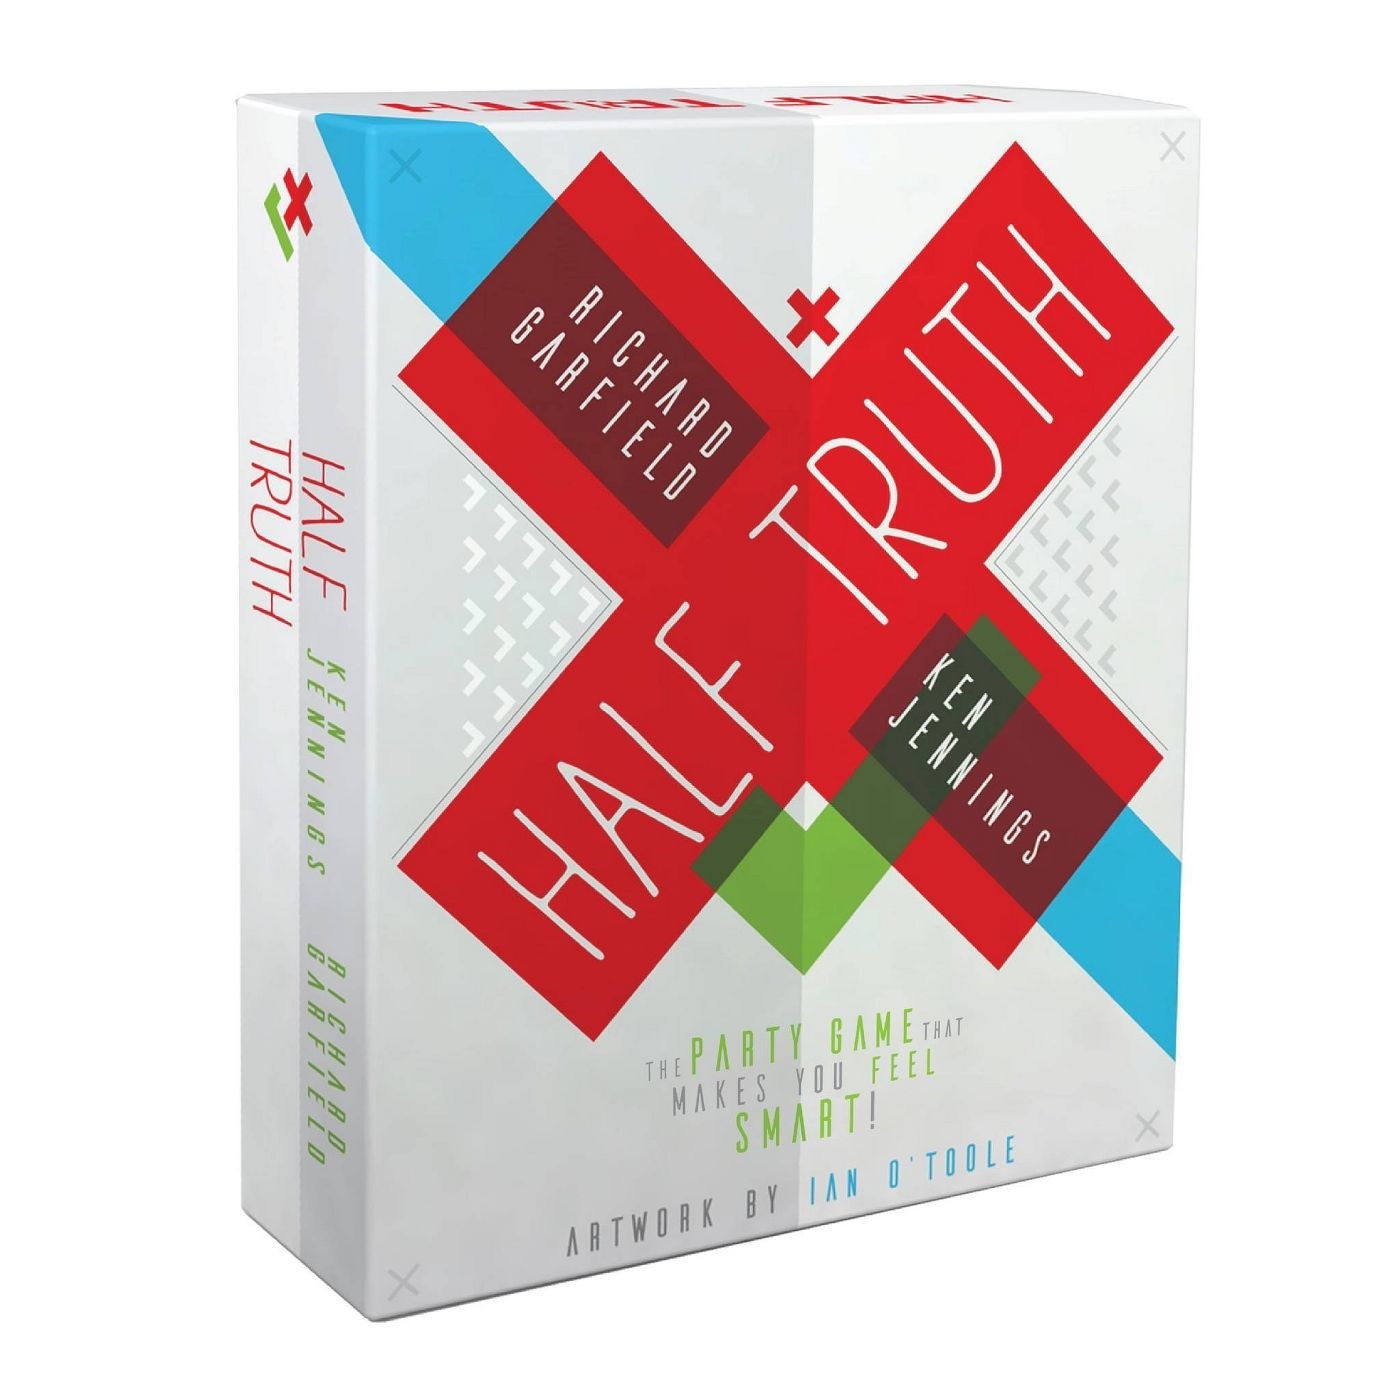 Promotional image of Half Truth.